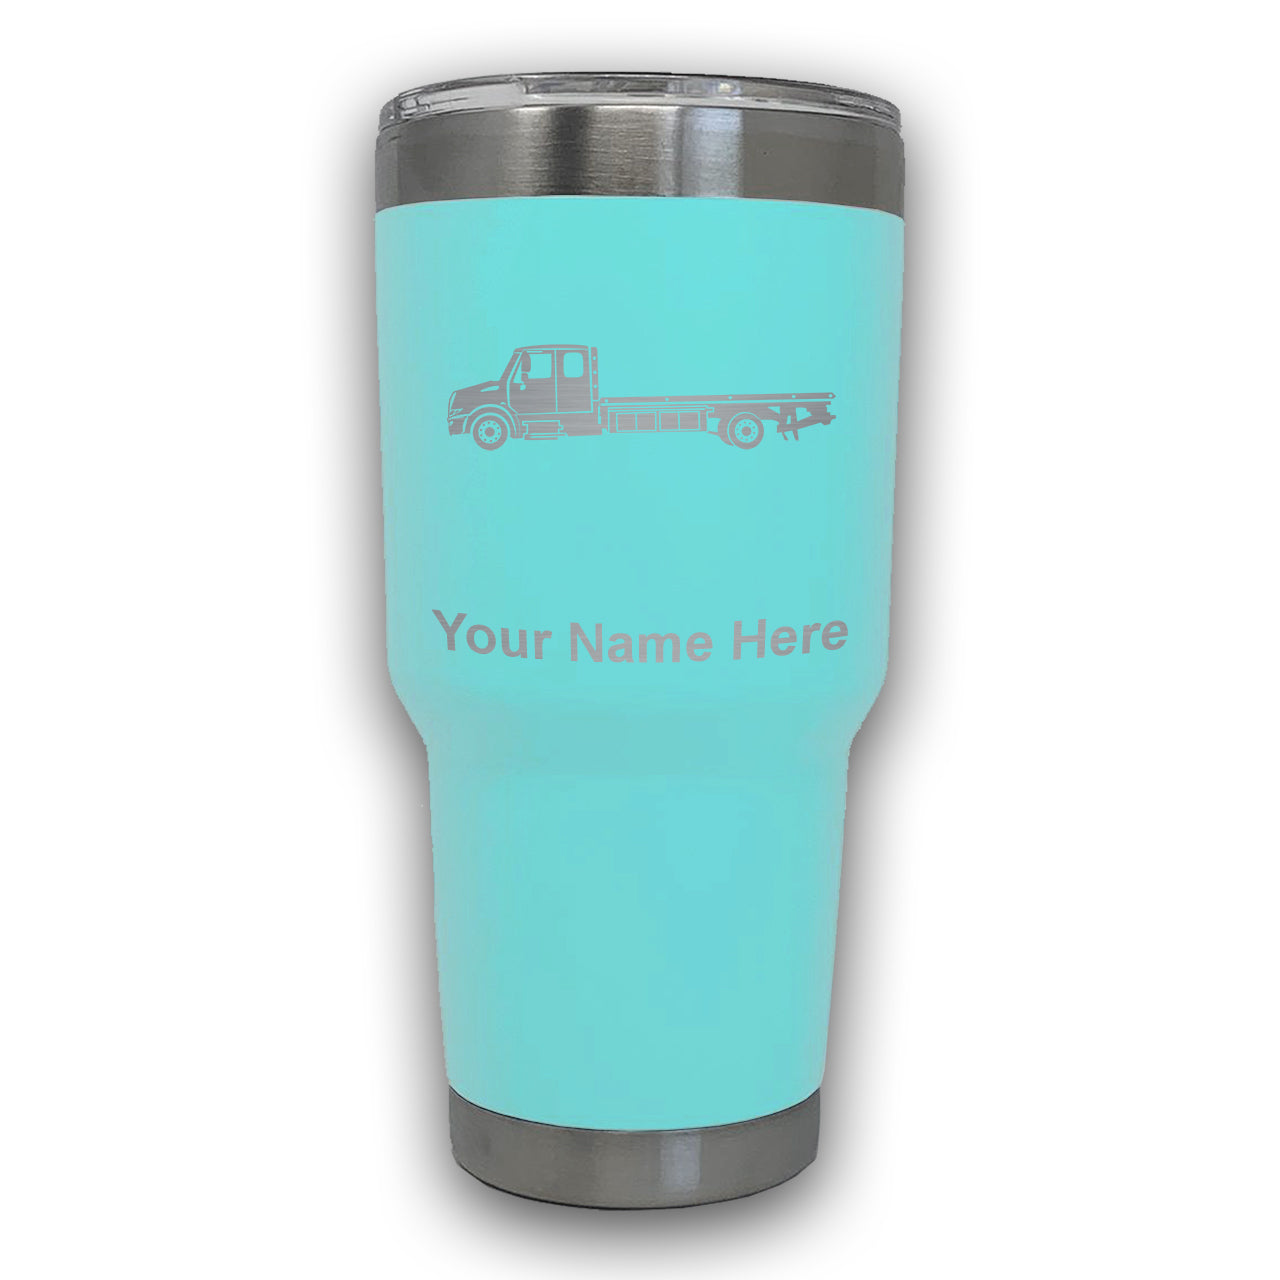 LaserGram 30oz Tumbler Mug, Flat Bed Tow Truck, Personalized Engraving Included